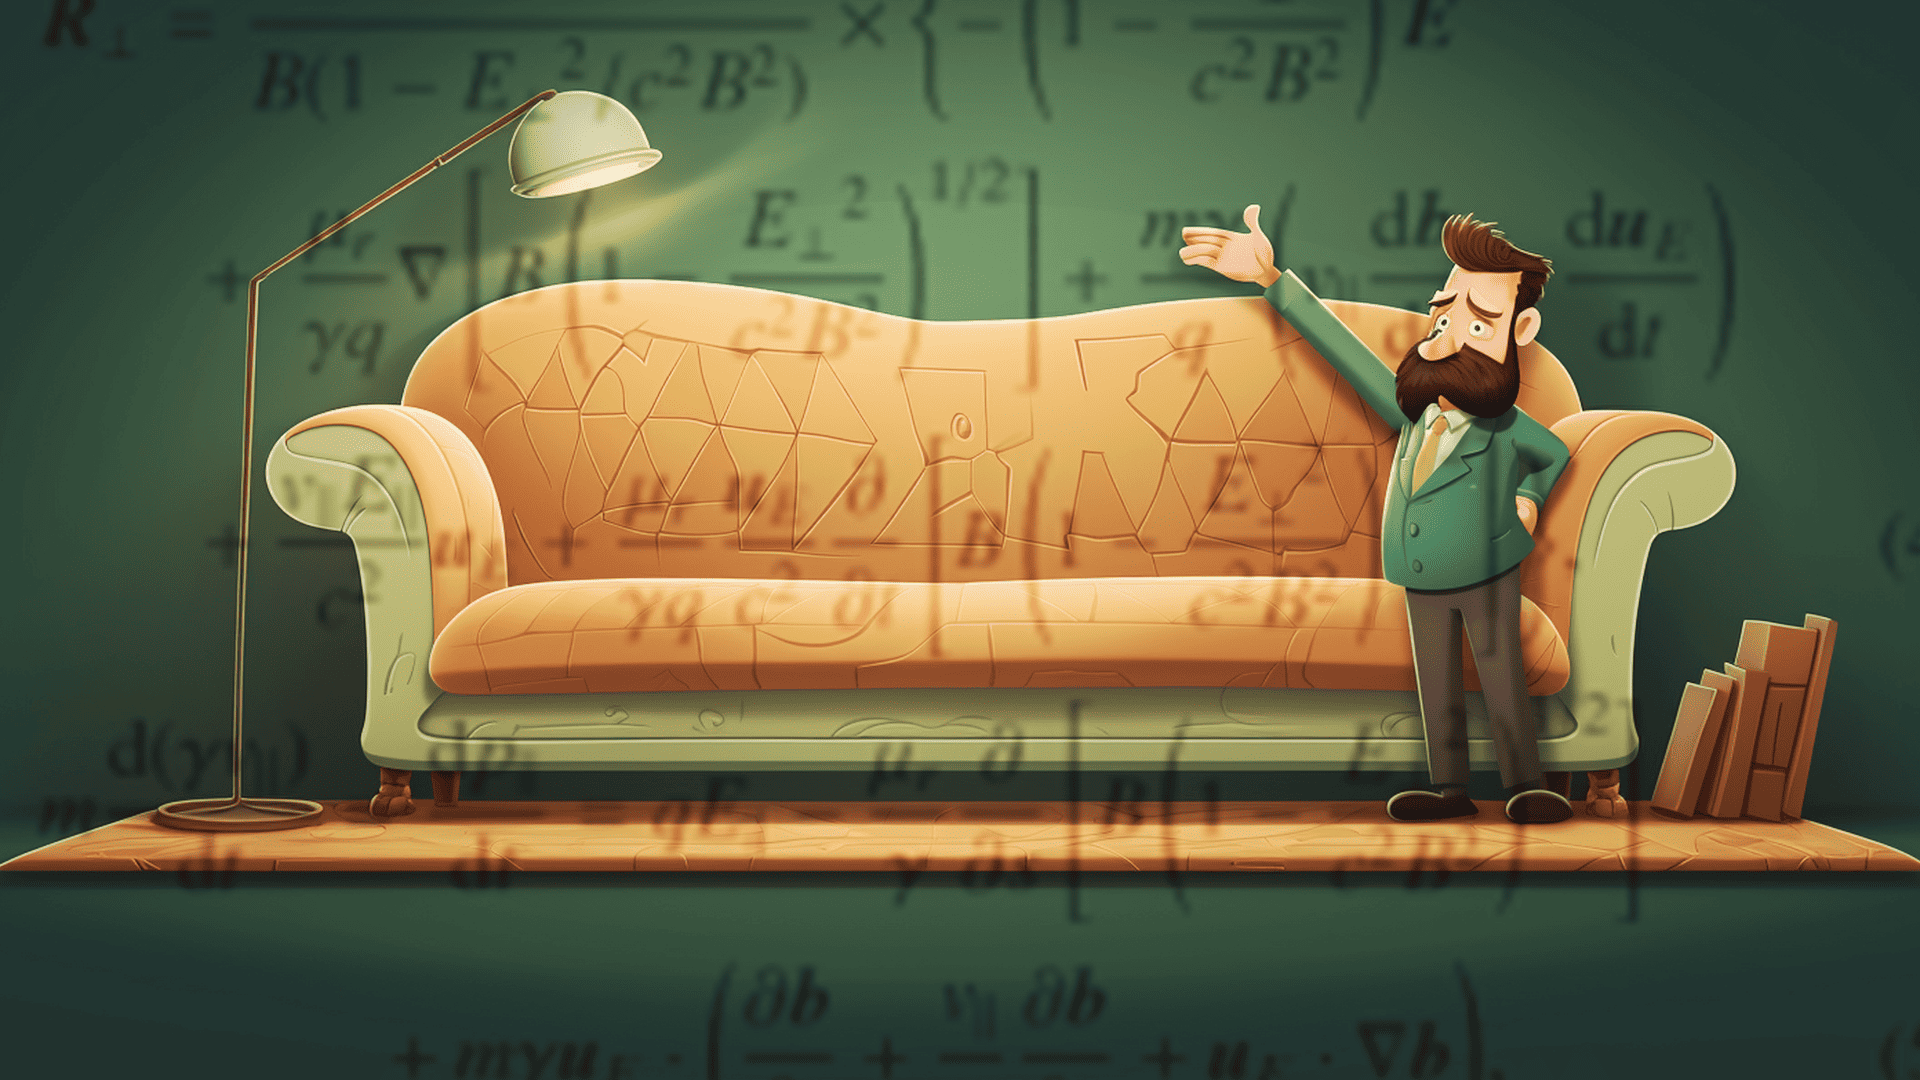 An image of a mathematician standing in front of a couch with equations flying through the air to depict the difficulty of measuring your couch